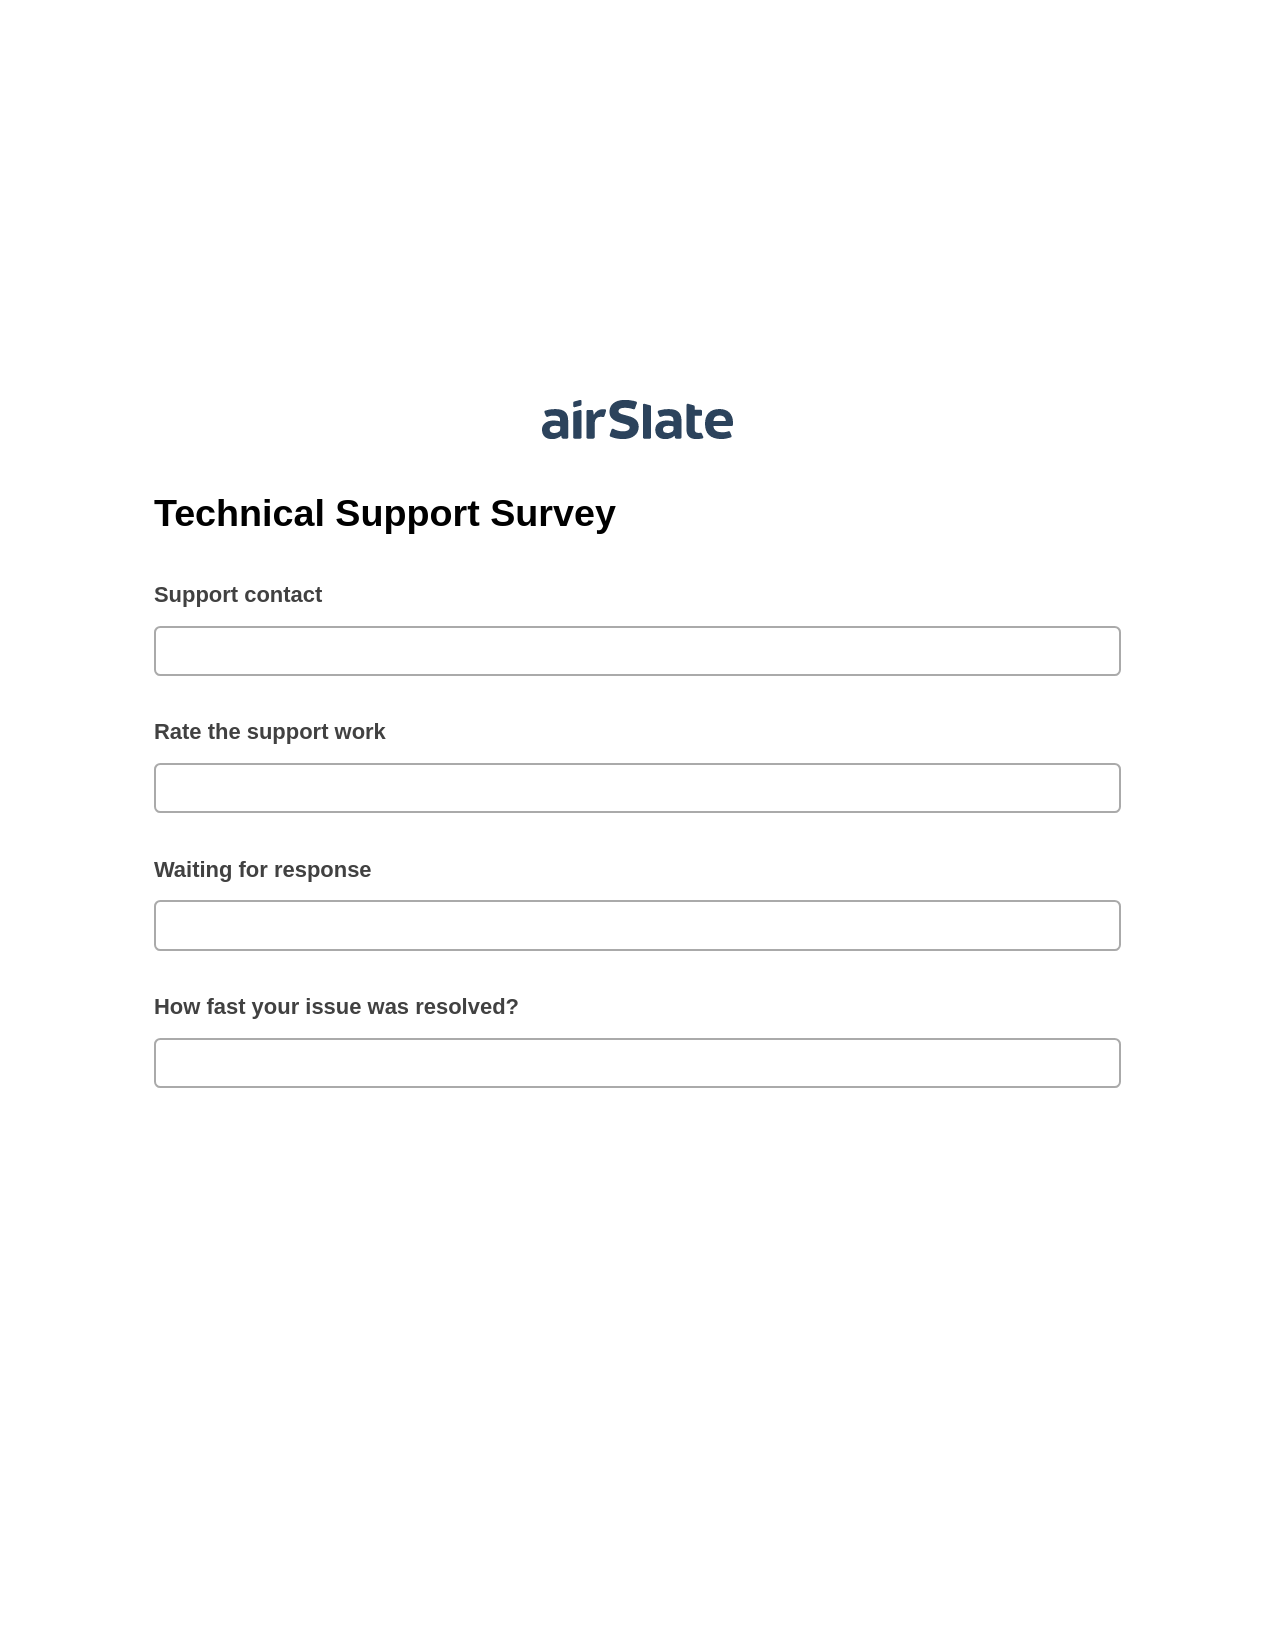 Technical Support Survey Pre-fill Dropdowns from Airtable, Create Slate Reminder Bot, Export to Excel 365 Bot